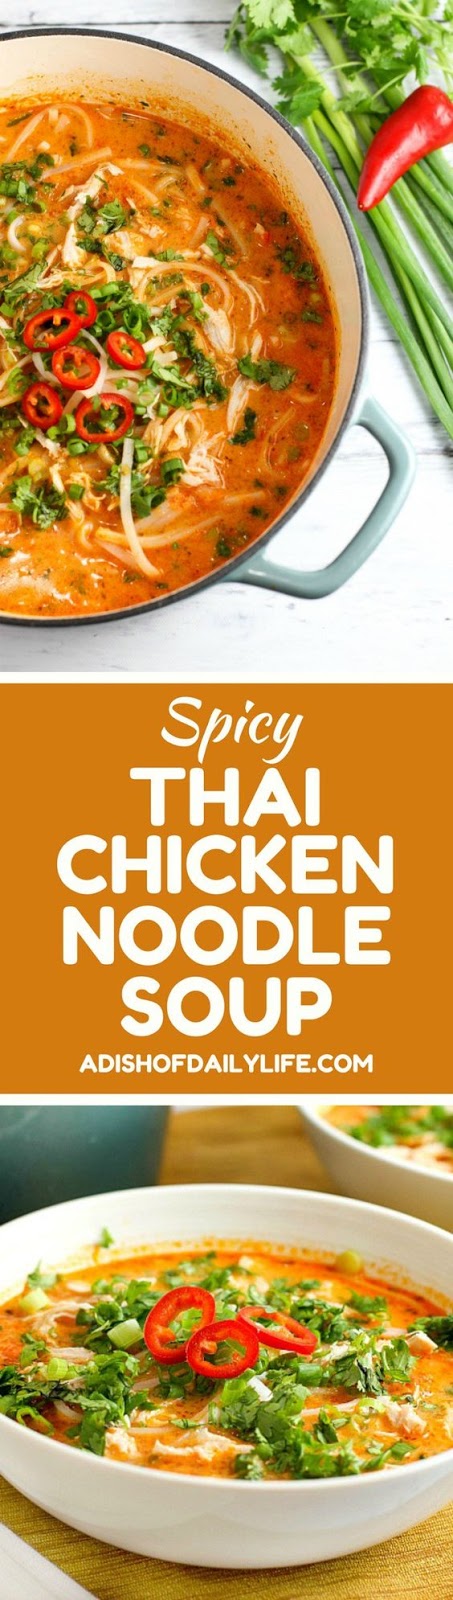 Skip the takeout! This Thai Chicken Noodle Soup is easy to make at home with ingredients you can find in your local supermarket. If you love Thai food, you need to try this recipe!